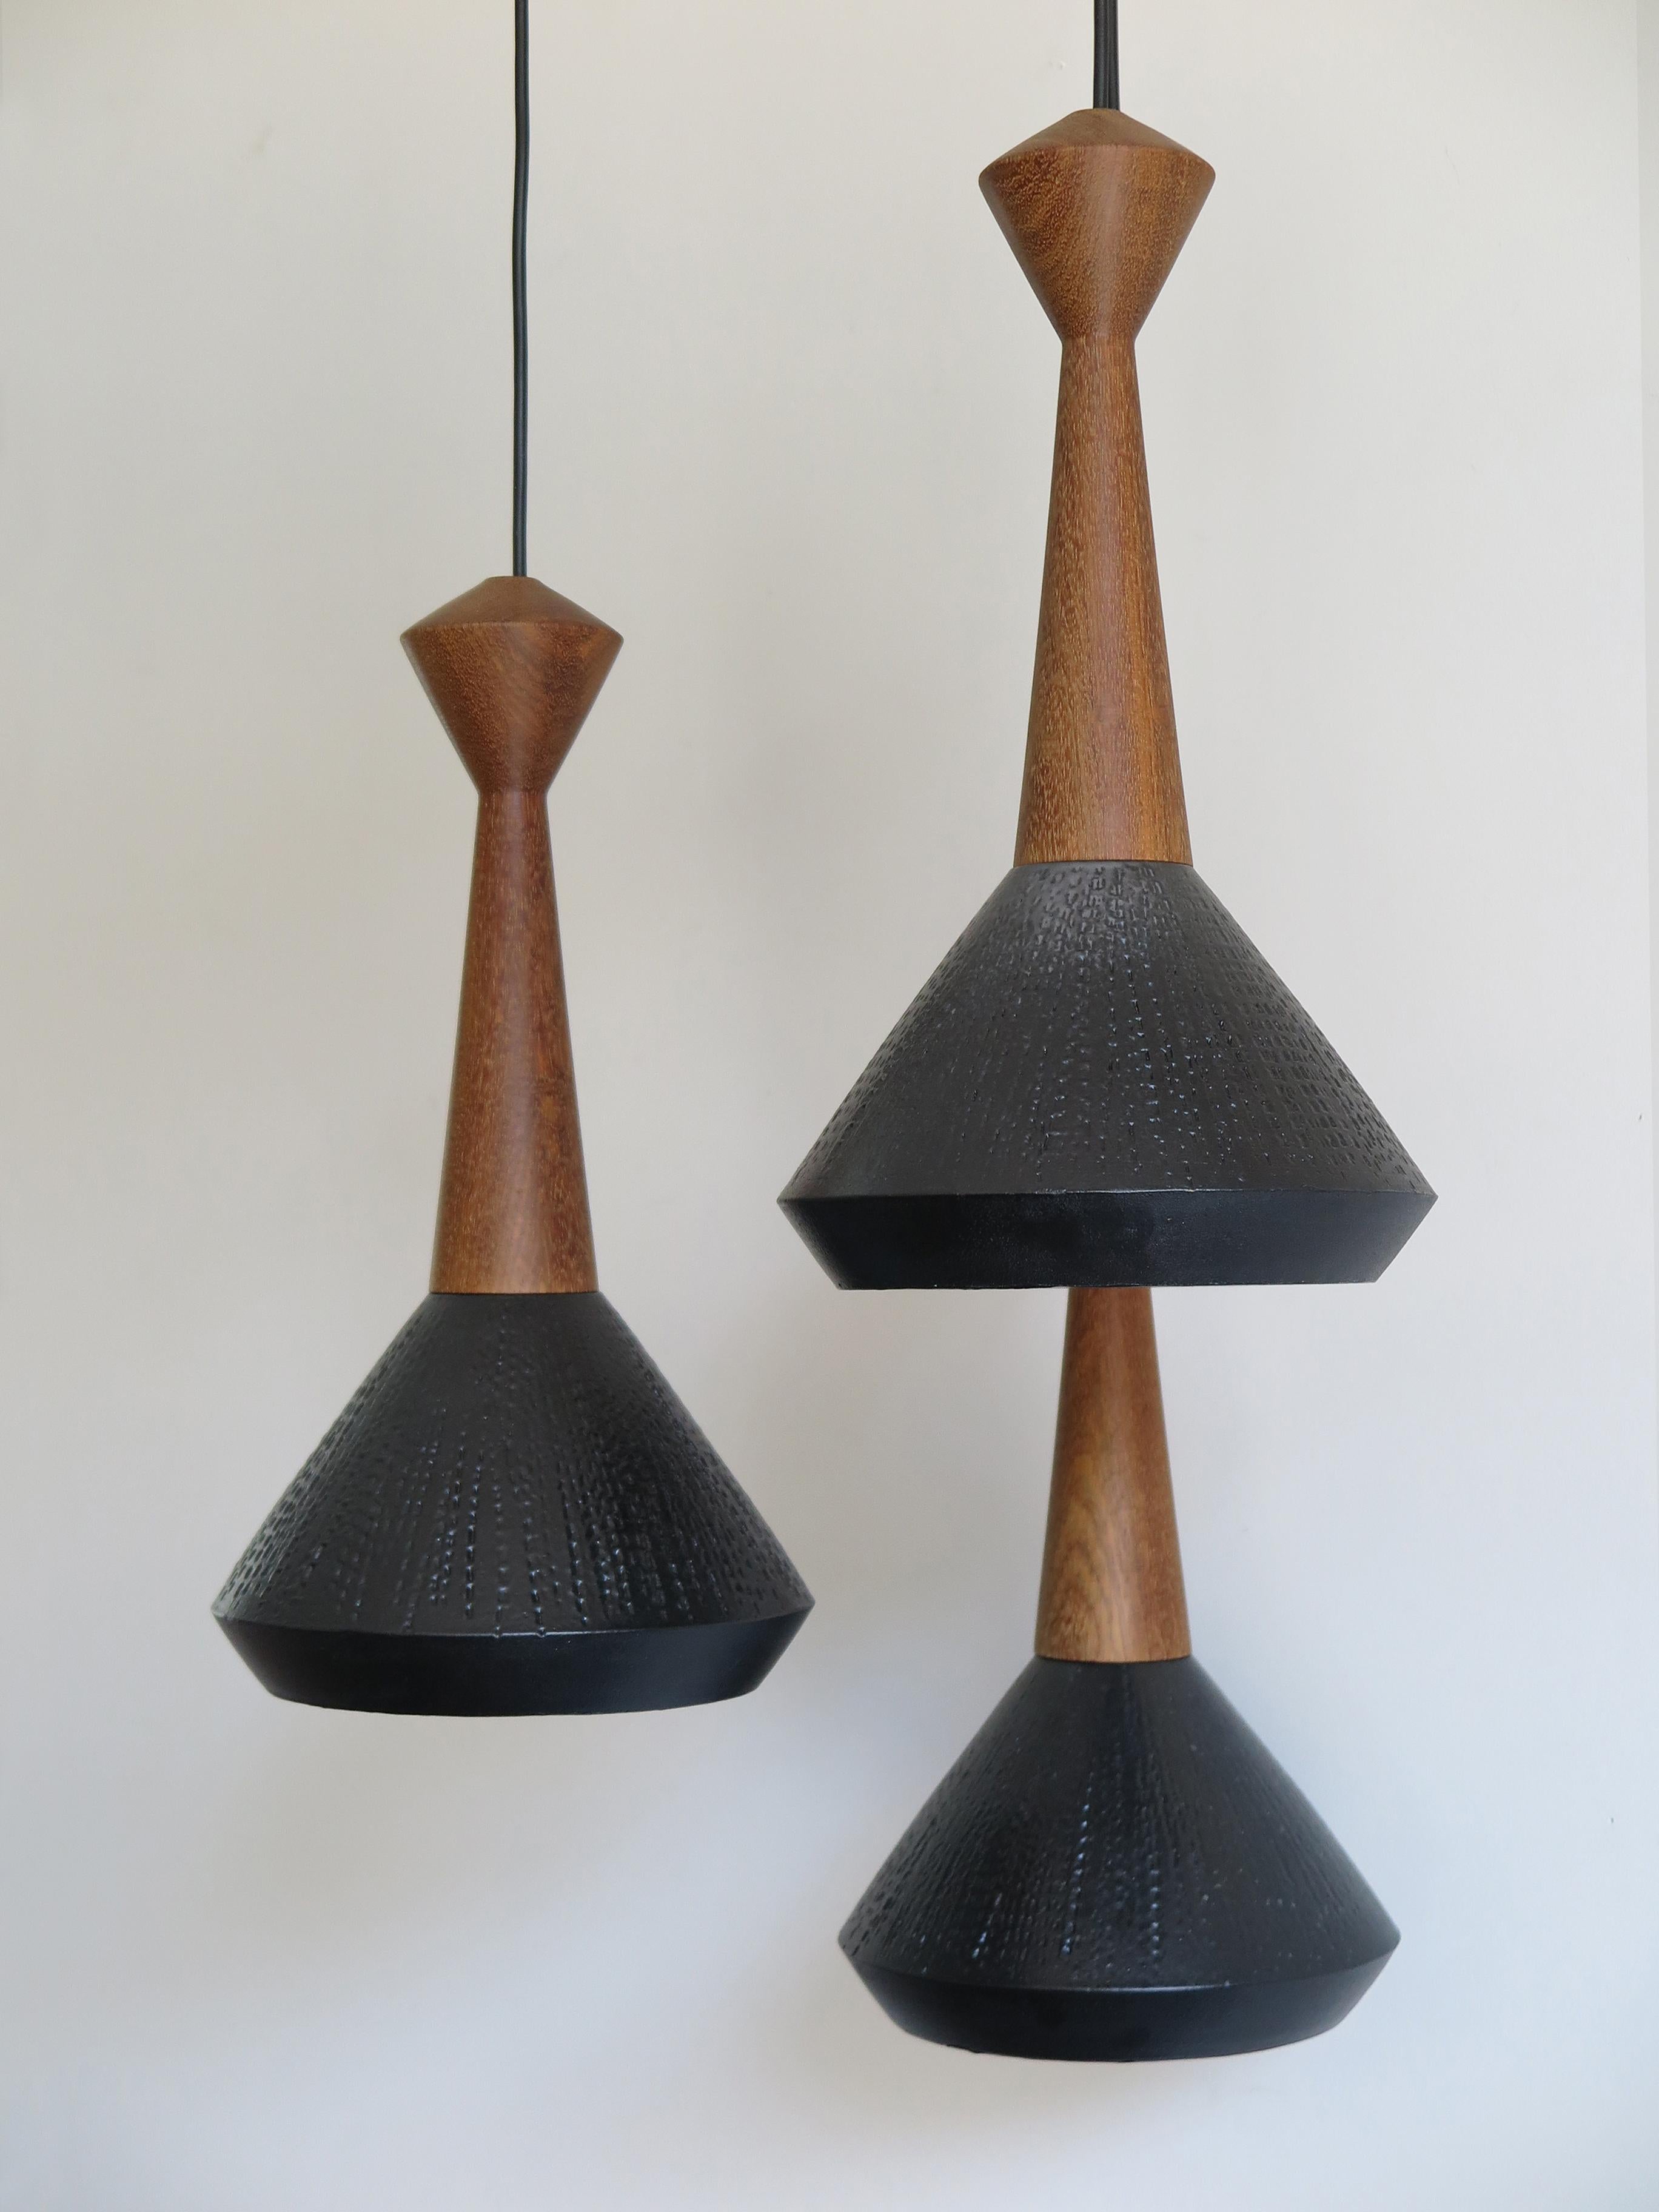 Hand-Painted Ceramic Wood Pendant Lamps Set of Contemporary Modern Design, Capperidicasa For Sale